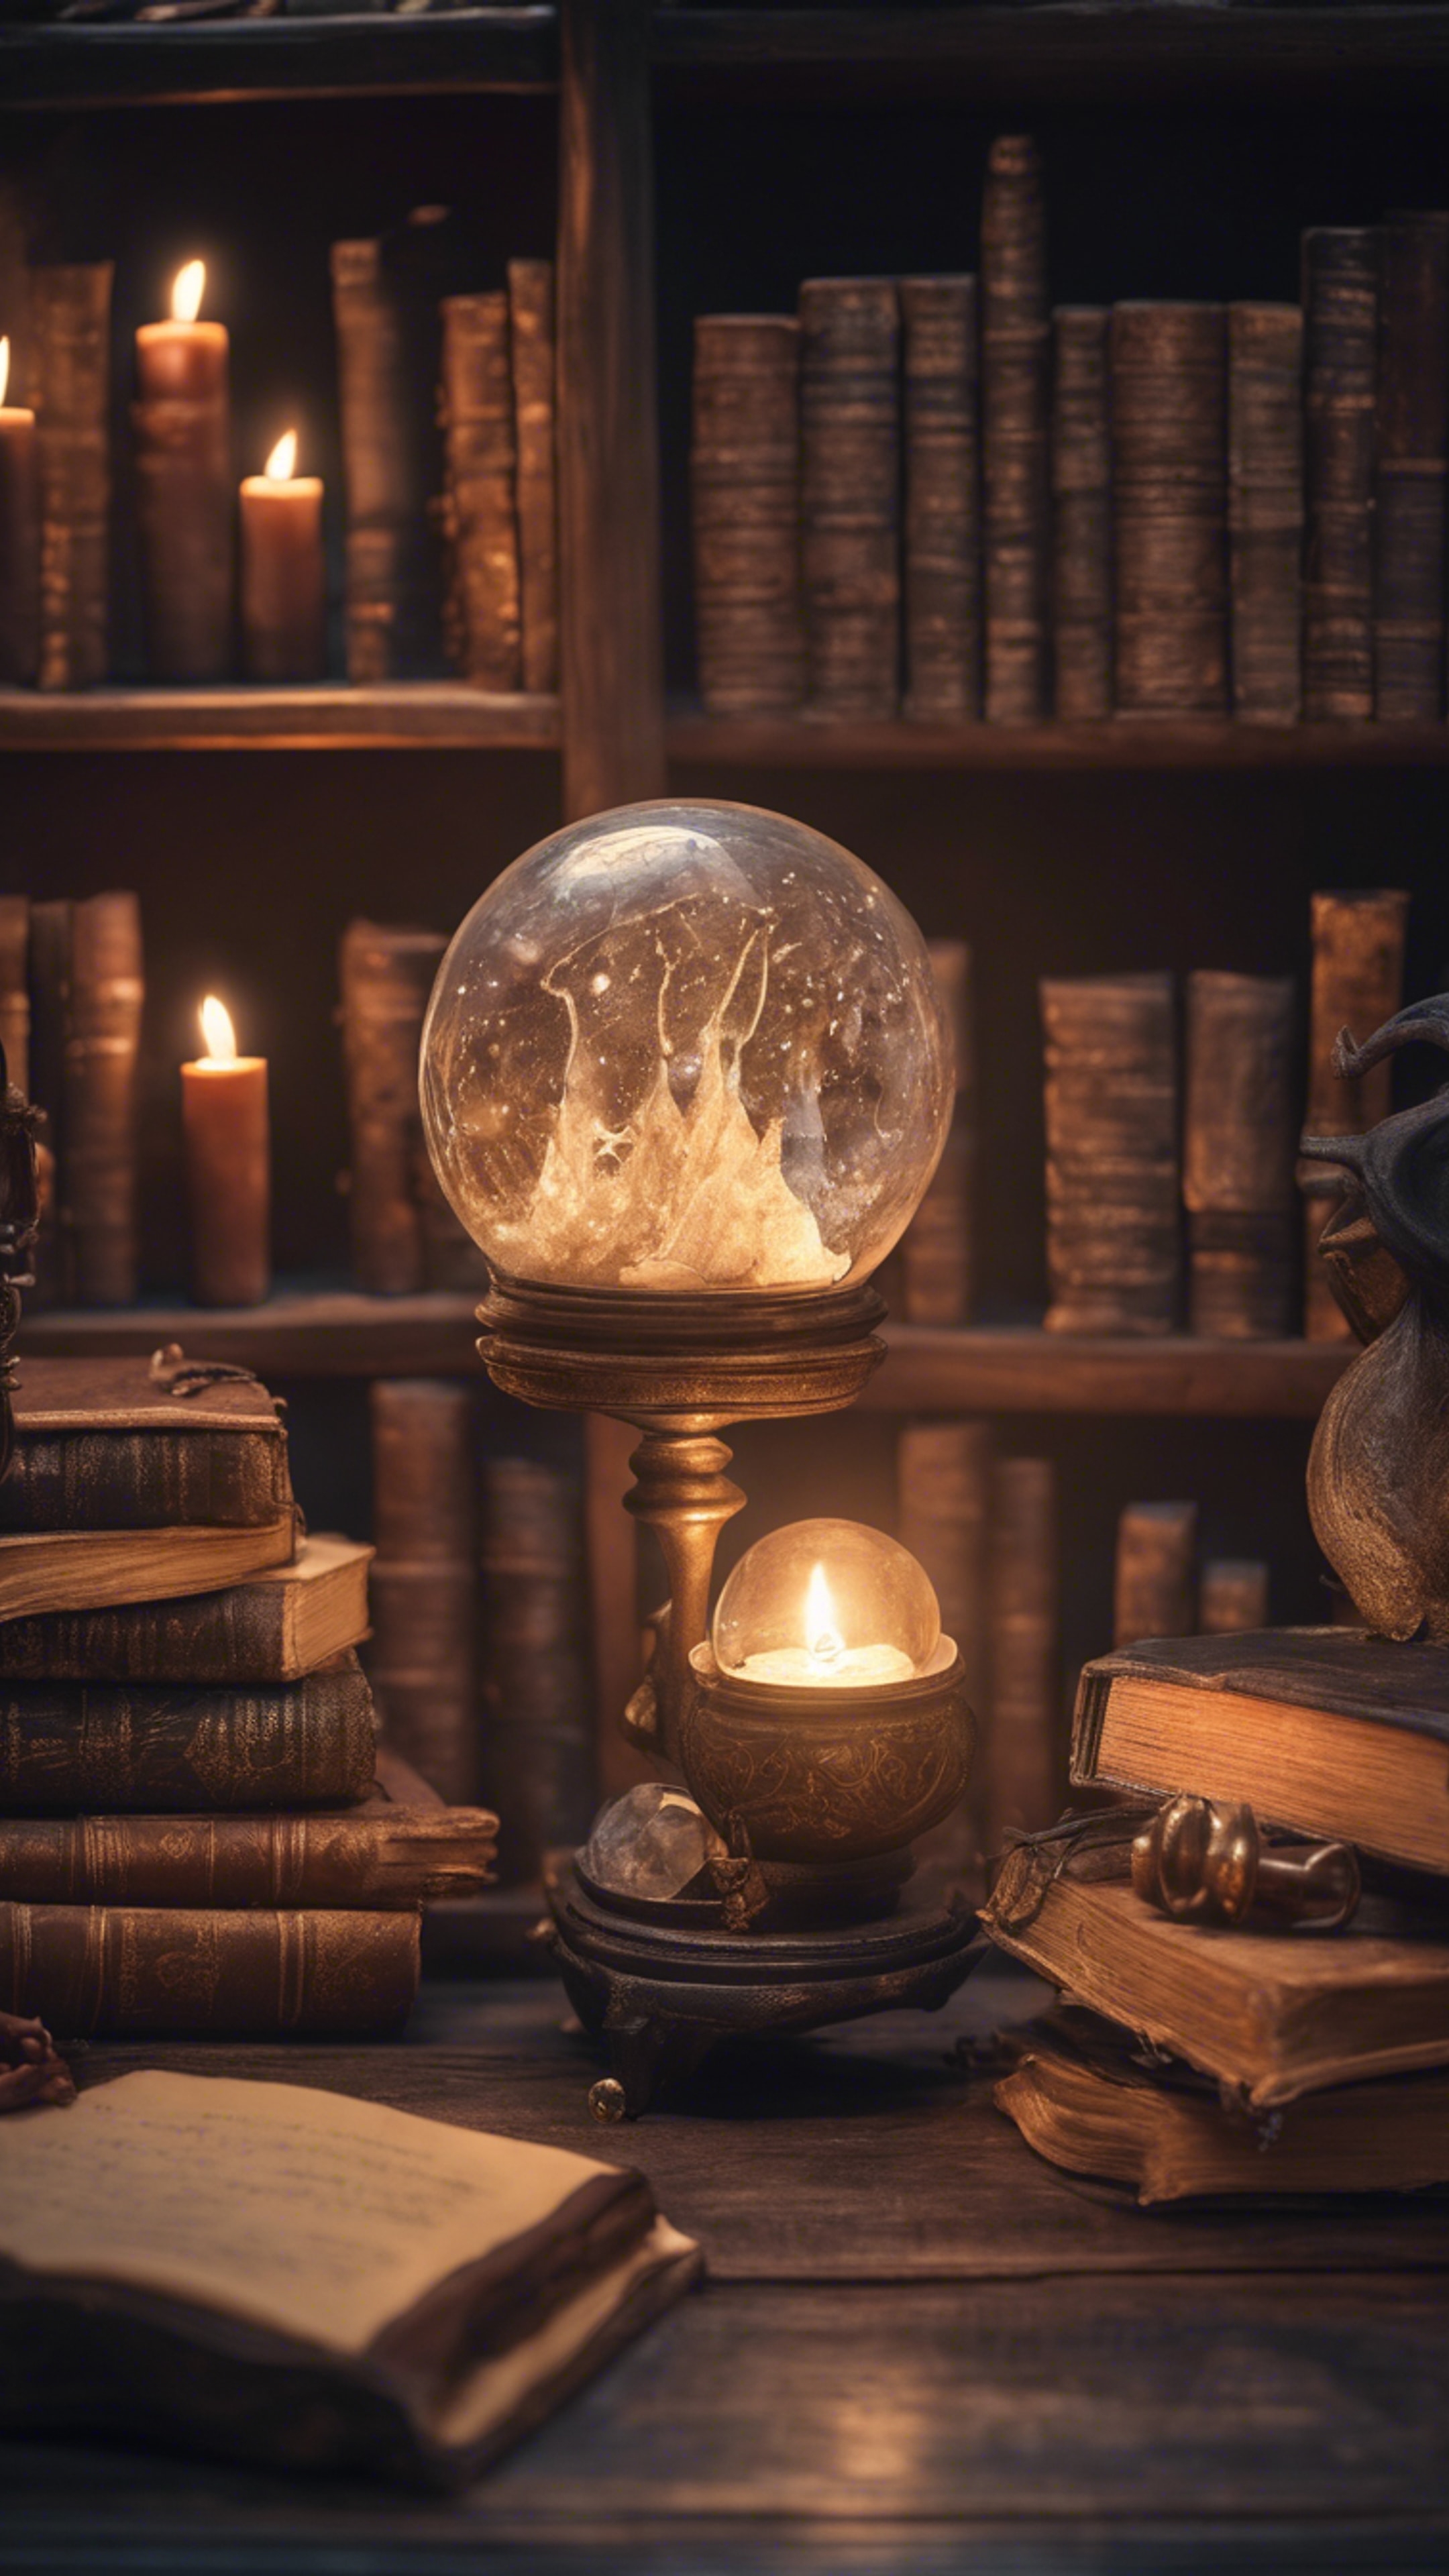 A cozy mystical scene with a wizard’s study room - magical artifacts, rows of spell books, a crystal ball, and a cauldron brewing a potion. Kertas dinding[df00e949c5584759a81e]